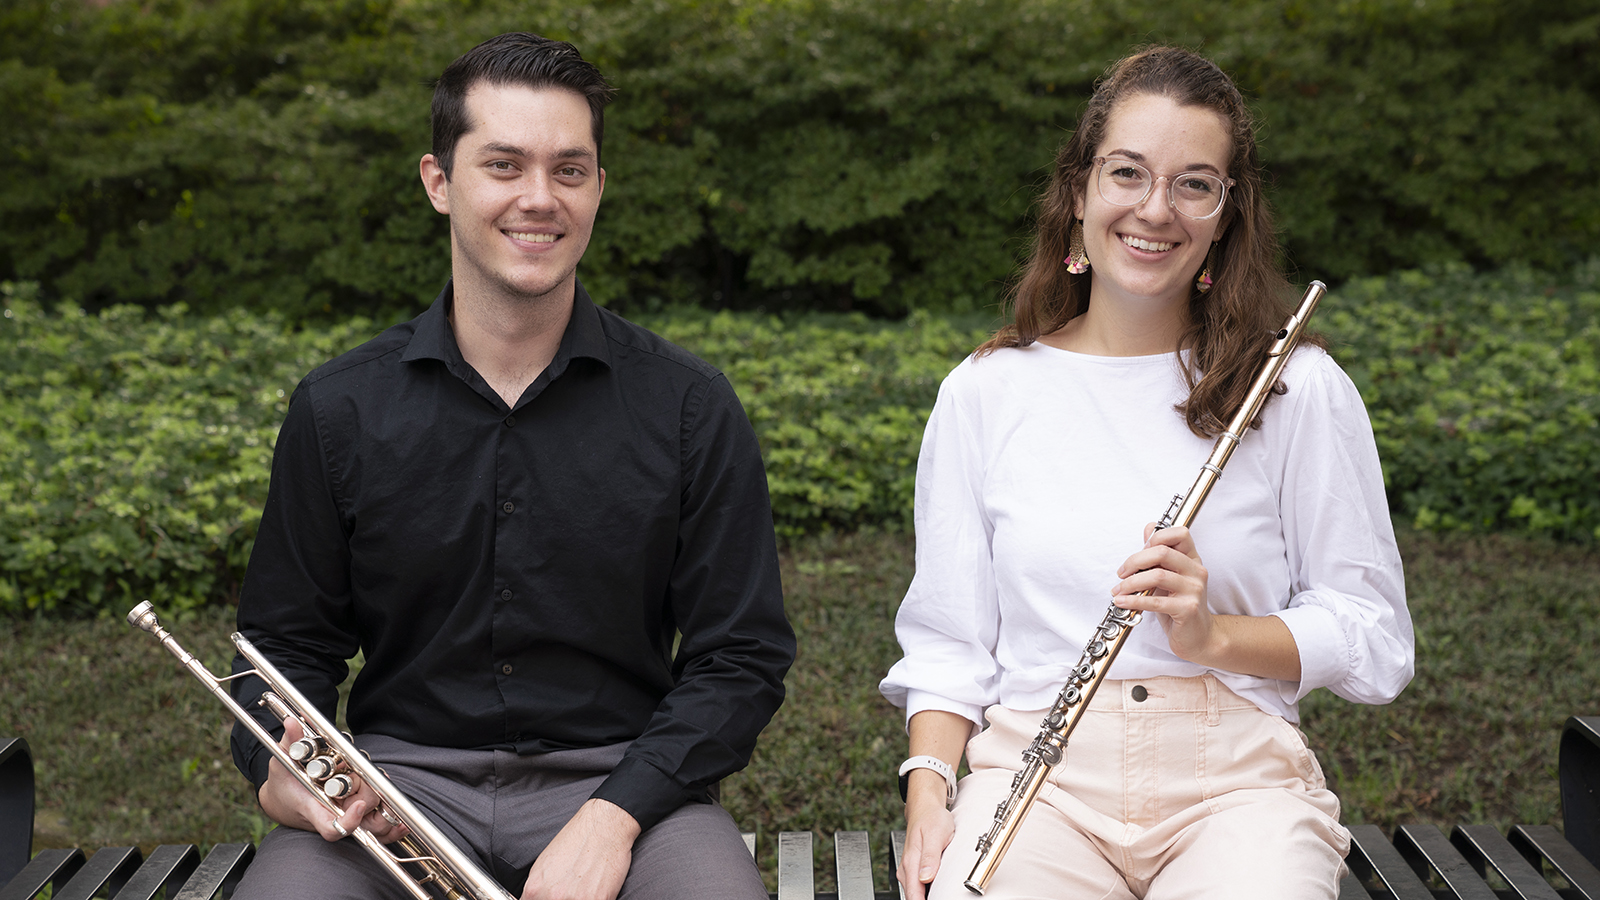 Dylan Rye and Jeanette-Marie Lewis are seated on a bench, holding their instruments.